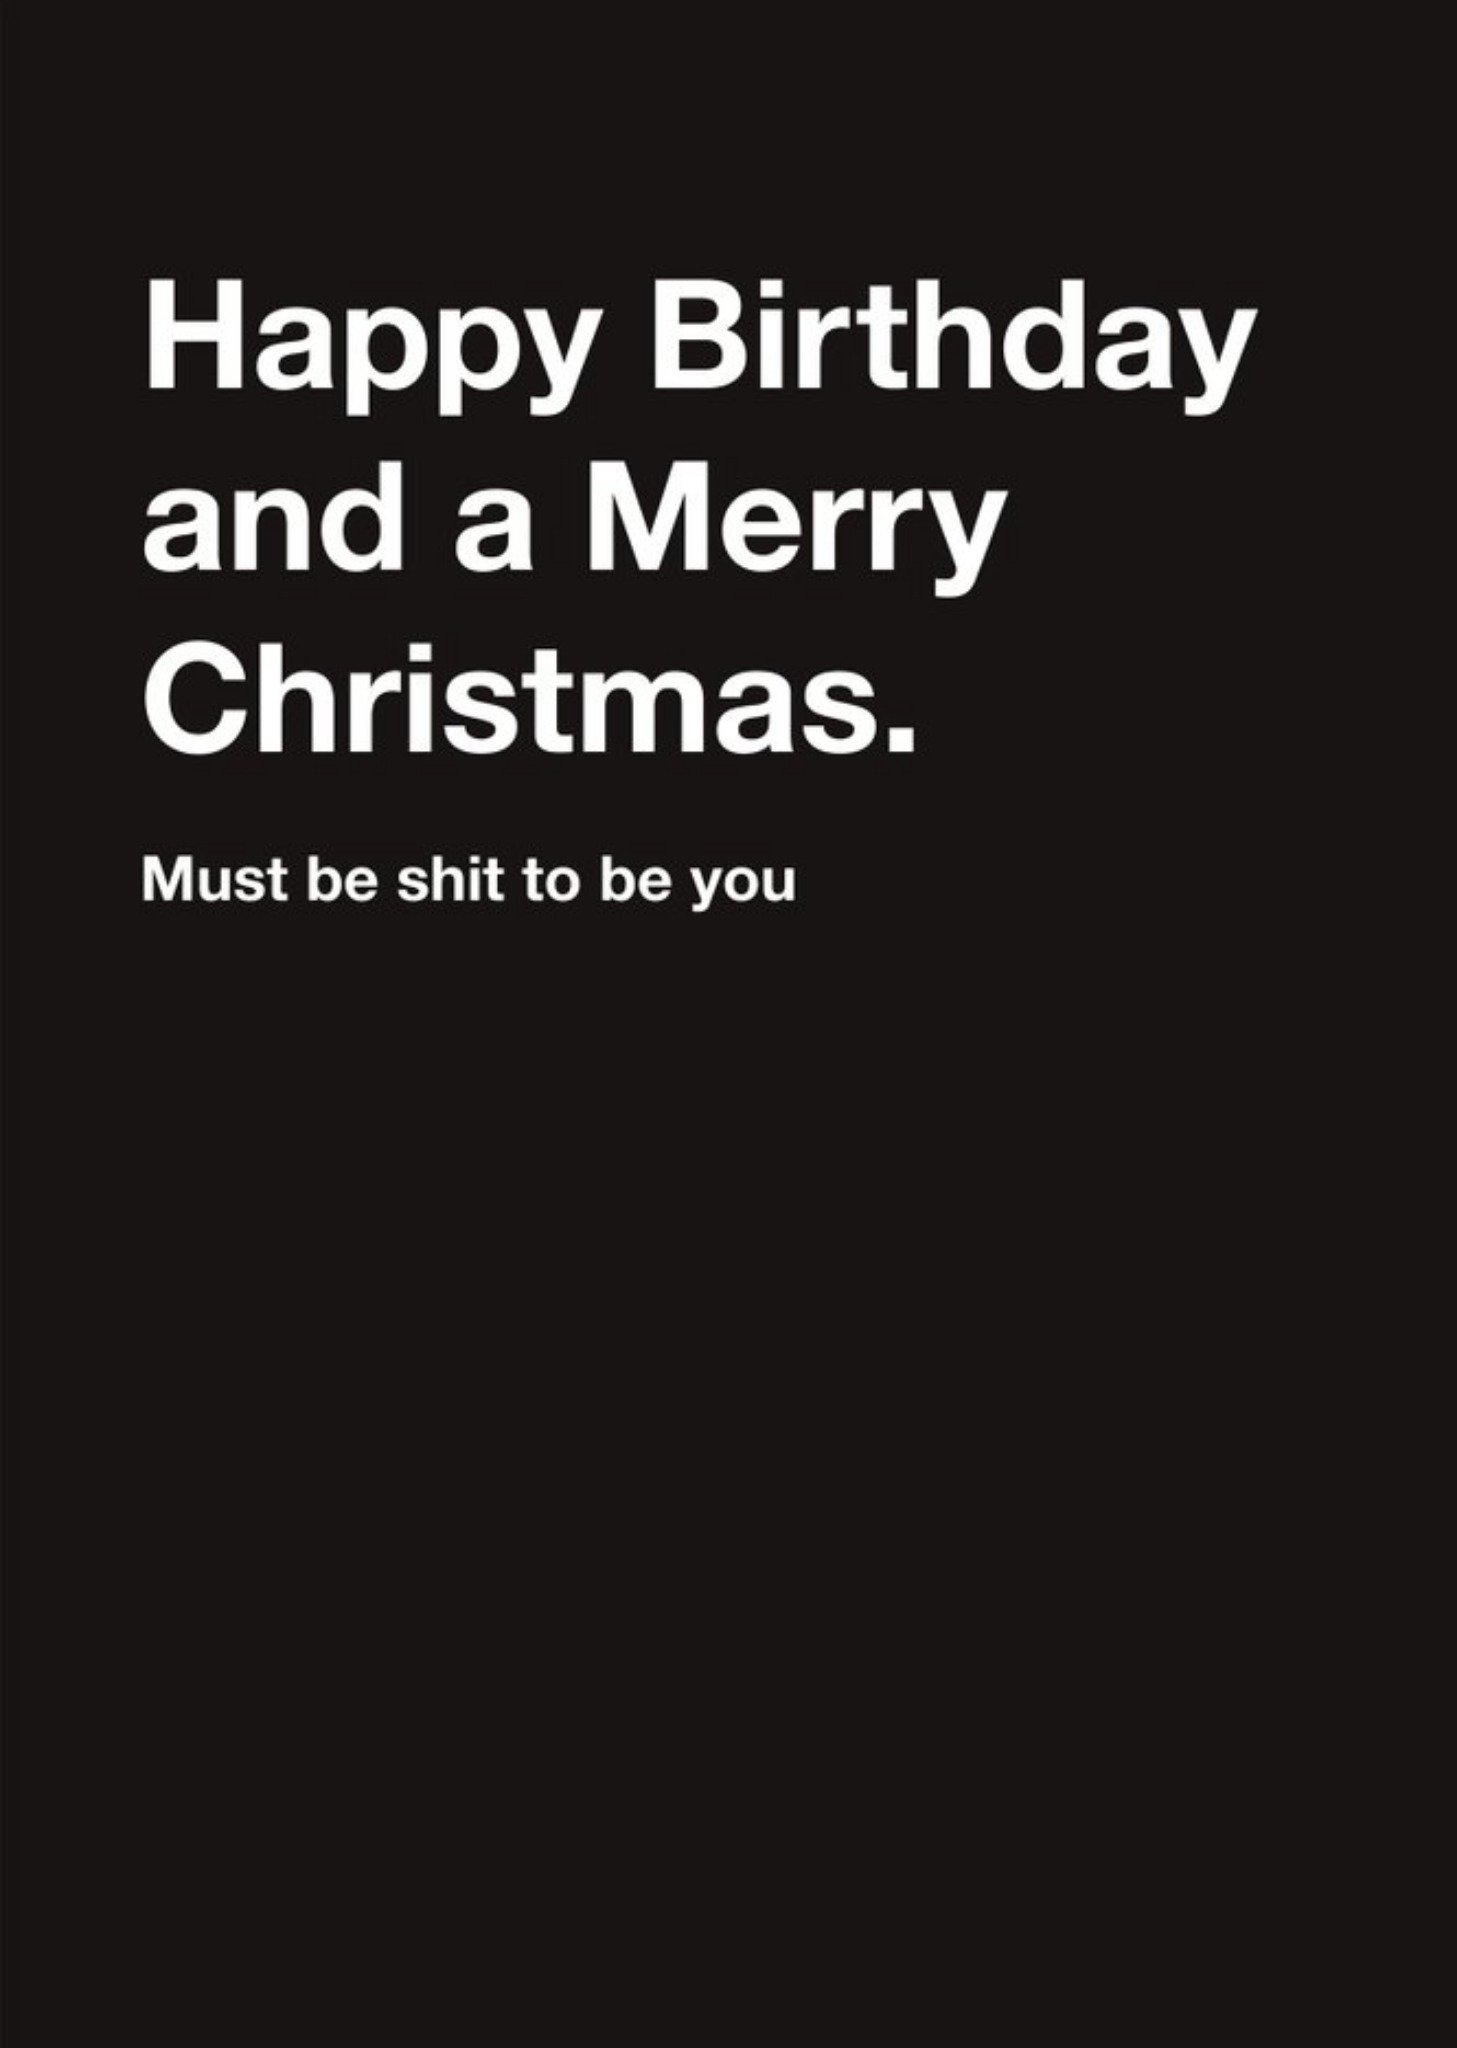 Moonpig Typographic Funny Happy Birthday And A Merry Christmas Card Ecard